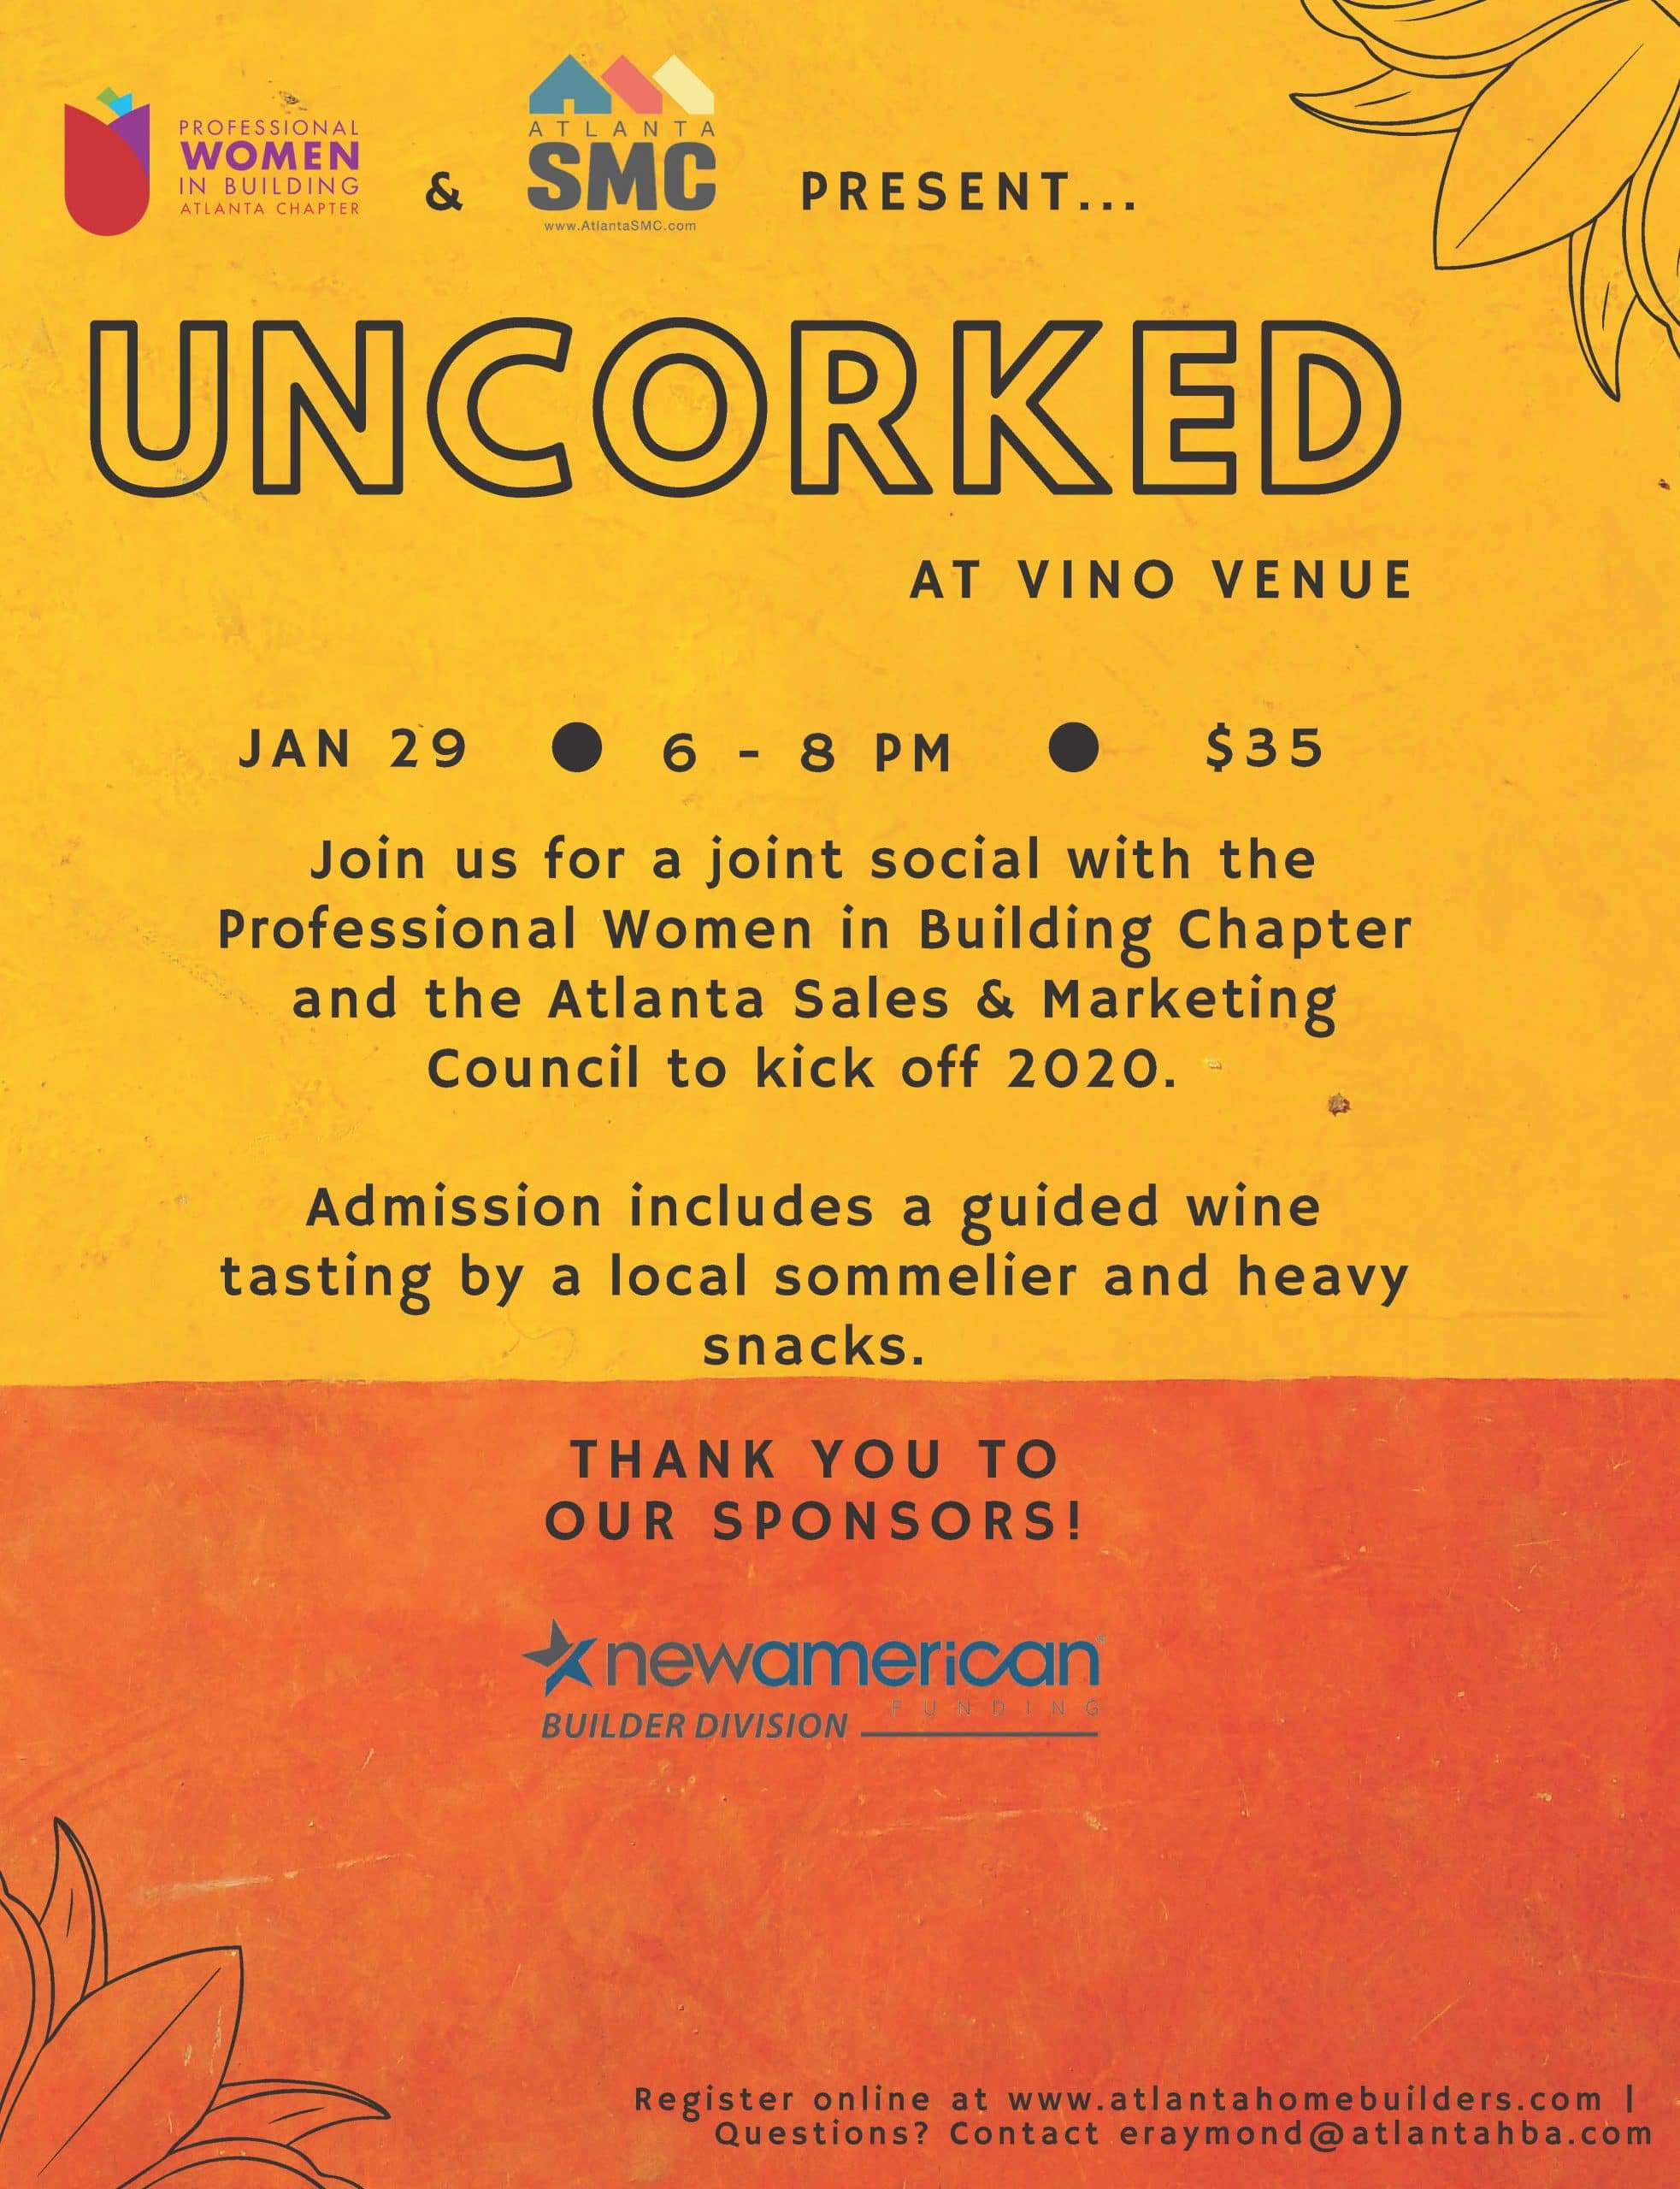 Tickets Selling Fast for Uncorked at Vino Venue Joint SMC/PWB Social